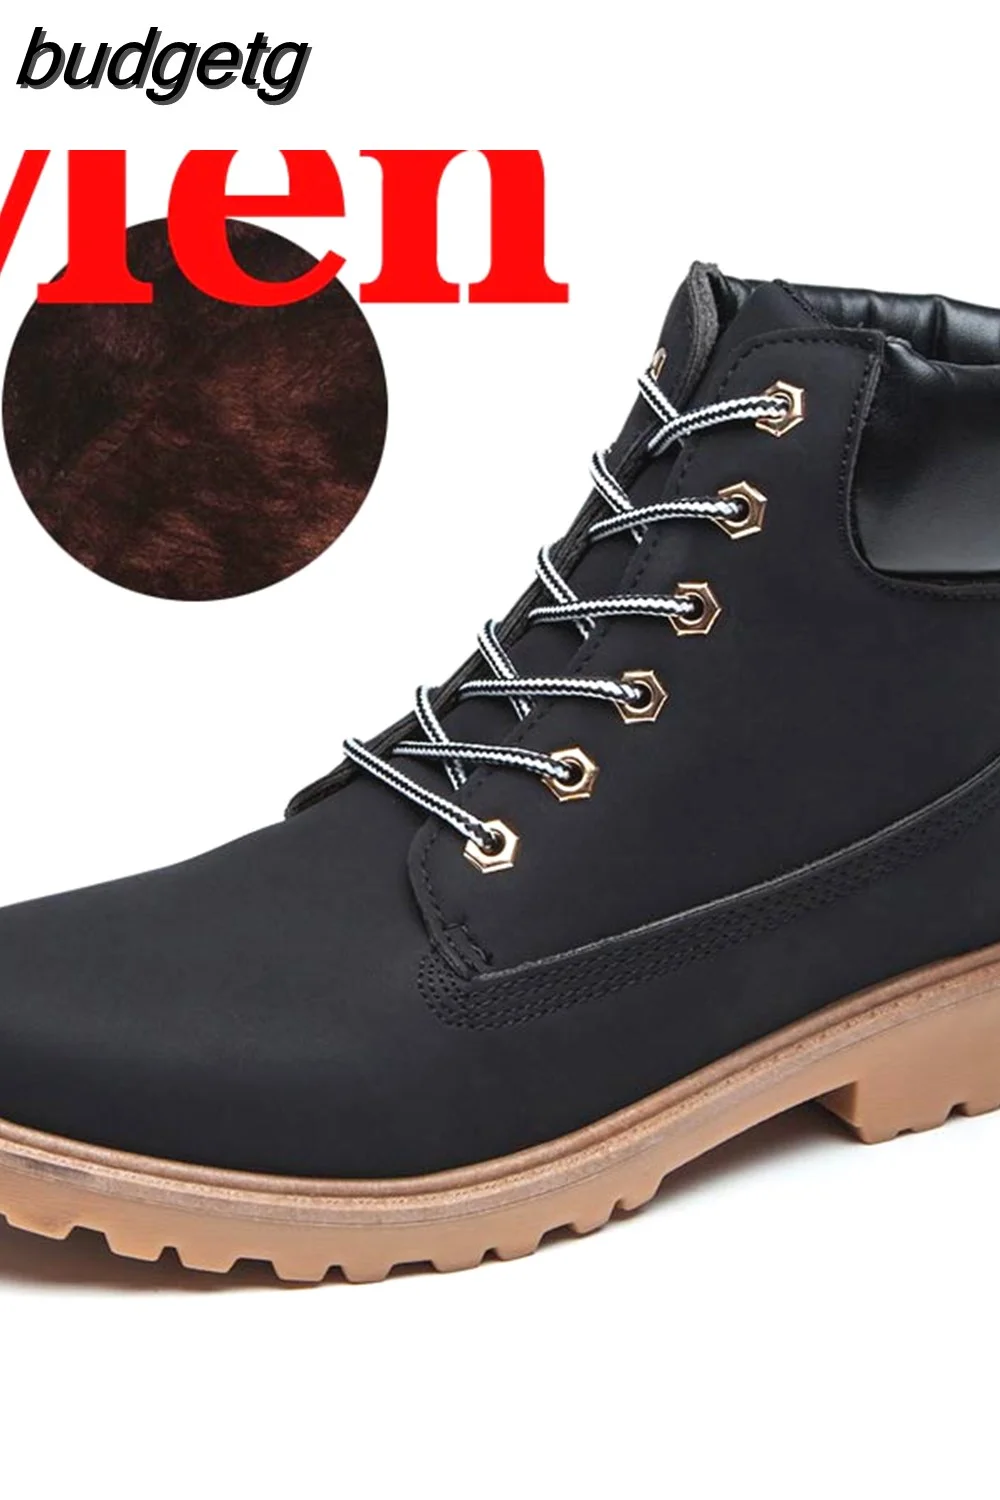 budgetg Men Boots PU Outdoor Snow Ankle Boots Male Lace Up Anti-slip Booties British Sneakers Plus Size 46 Zapatos De Hombre